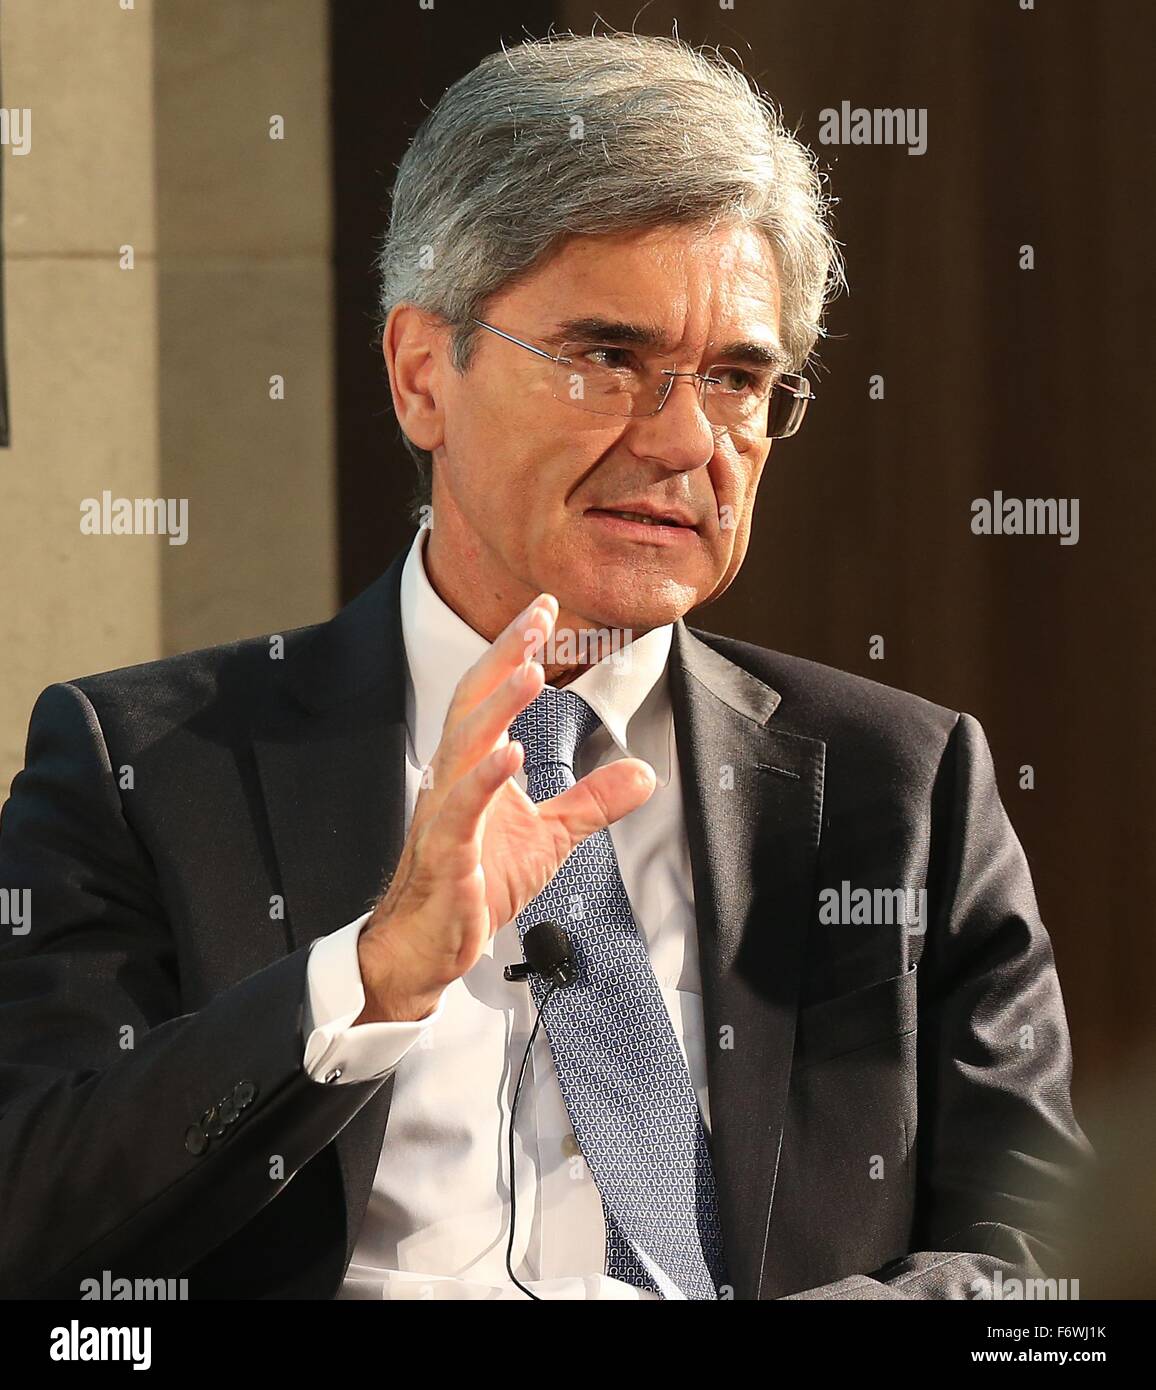 CEO of Siemens AG Joe Kaeser speaks during the 'Tag der Teilhabe' (lit. Day of participation) to encourage the participation of employees and managerial staff in companies. Photo: Wolfgang Kumm/dpa Stock Photo